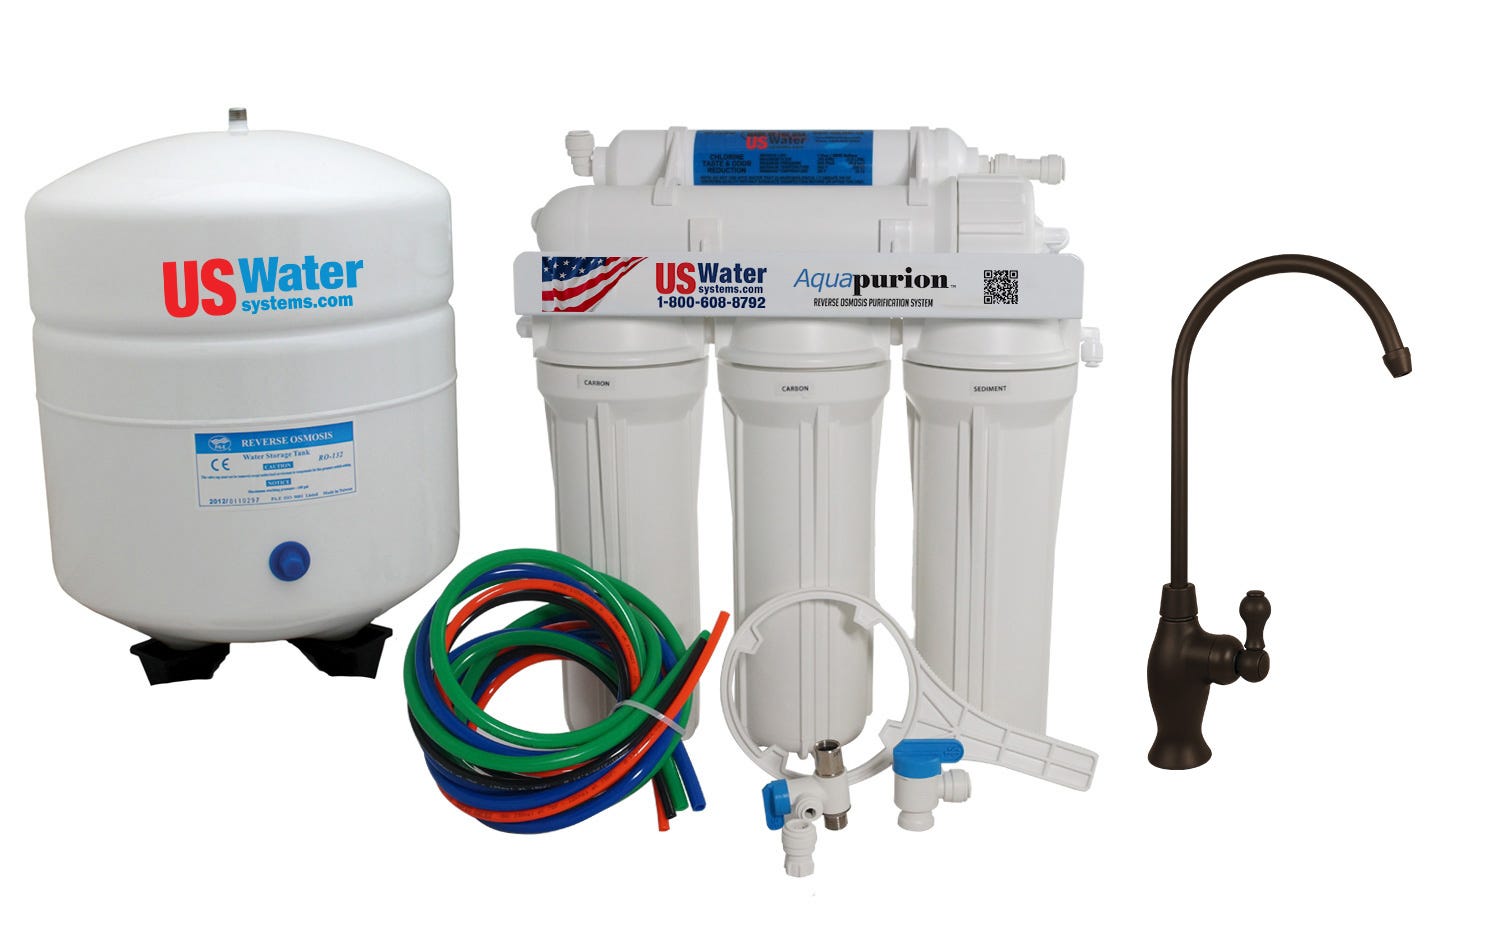 US Water Aquapurion 5-Stage Reverse Osmosis System With Enhanced Arsenic Removal